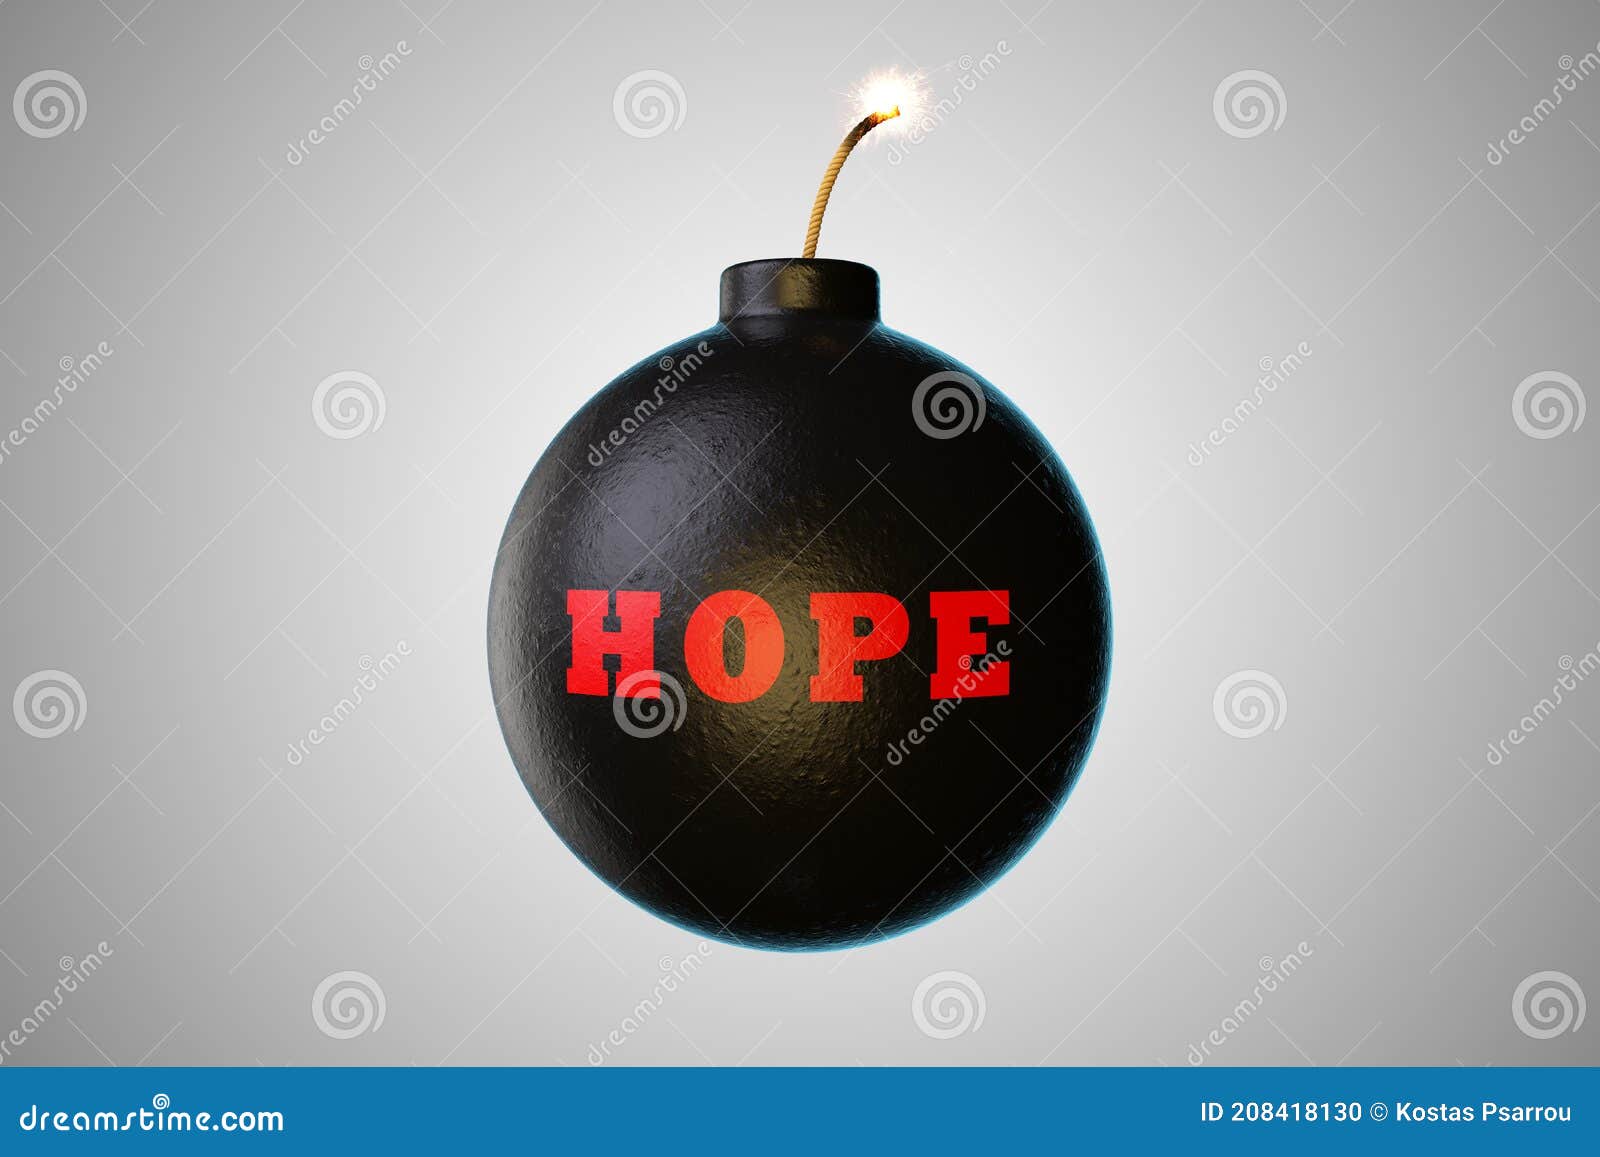 bomb-hope-ready-to-explode-demonstrating-lost-hope-concept-d-illustration-bomb-hope-ready-to-explode-demonstrating-lost-hope-208418130.jpg